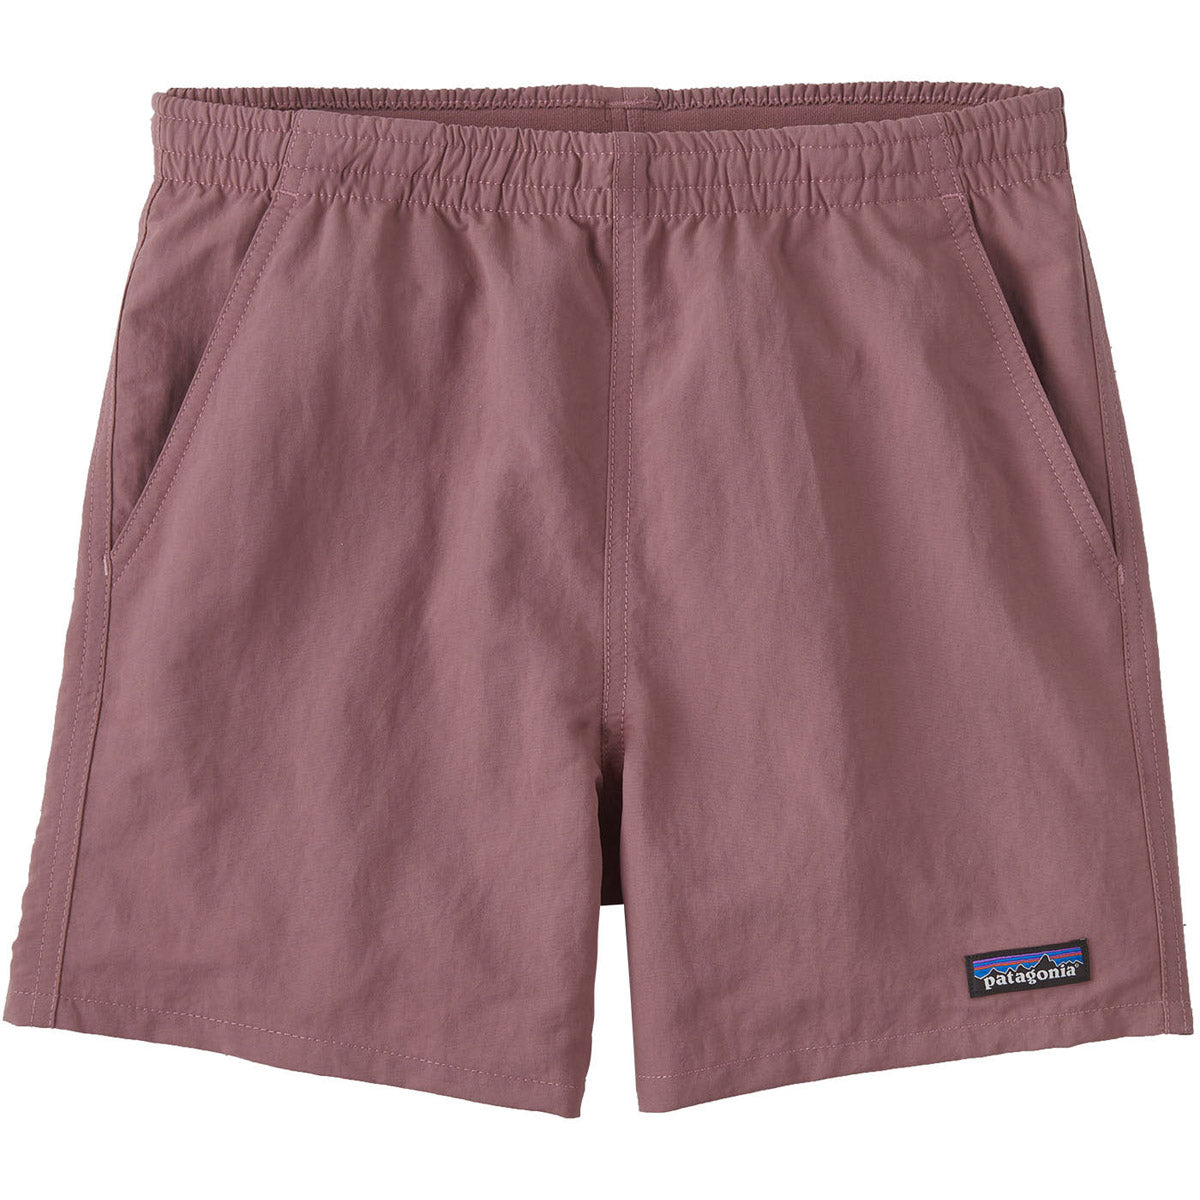 Rise of an Icon: Baggies Shorts From Patagonia